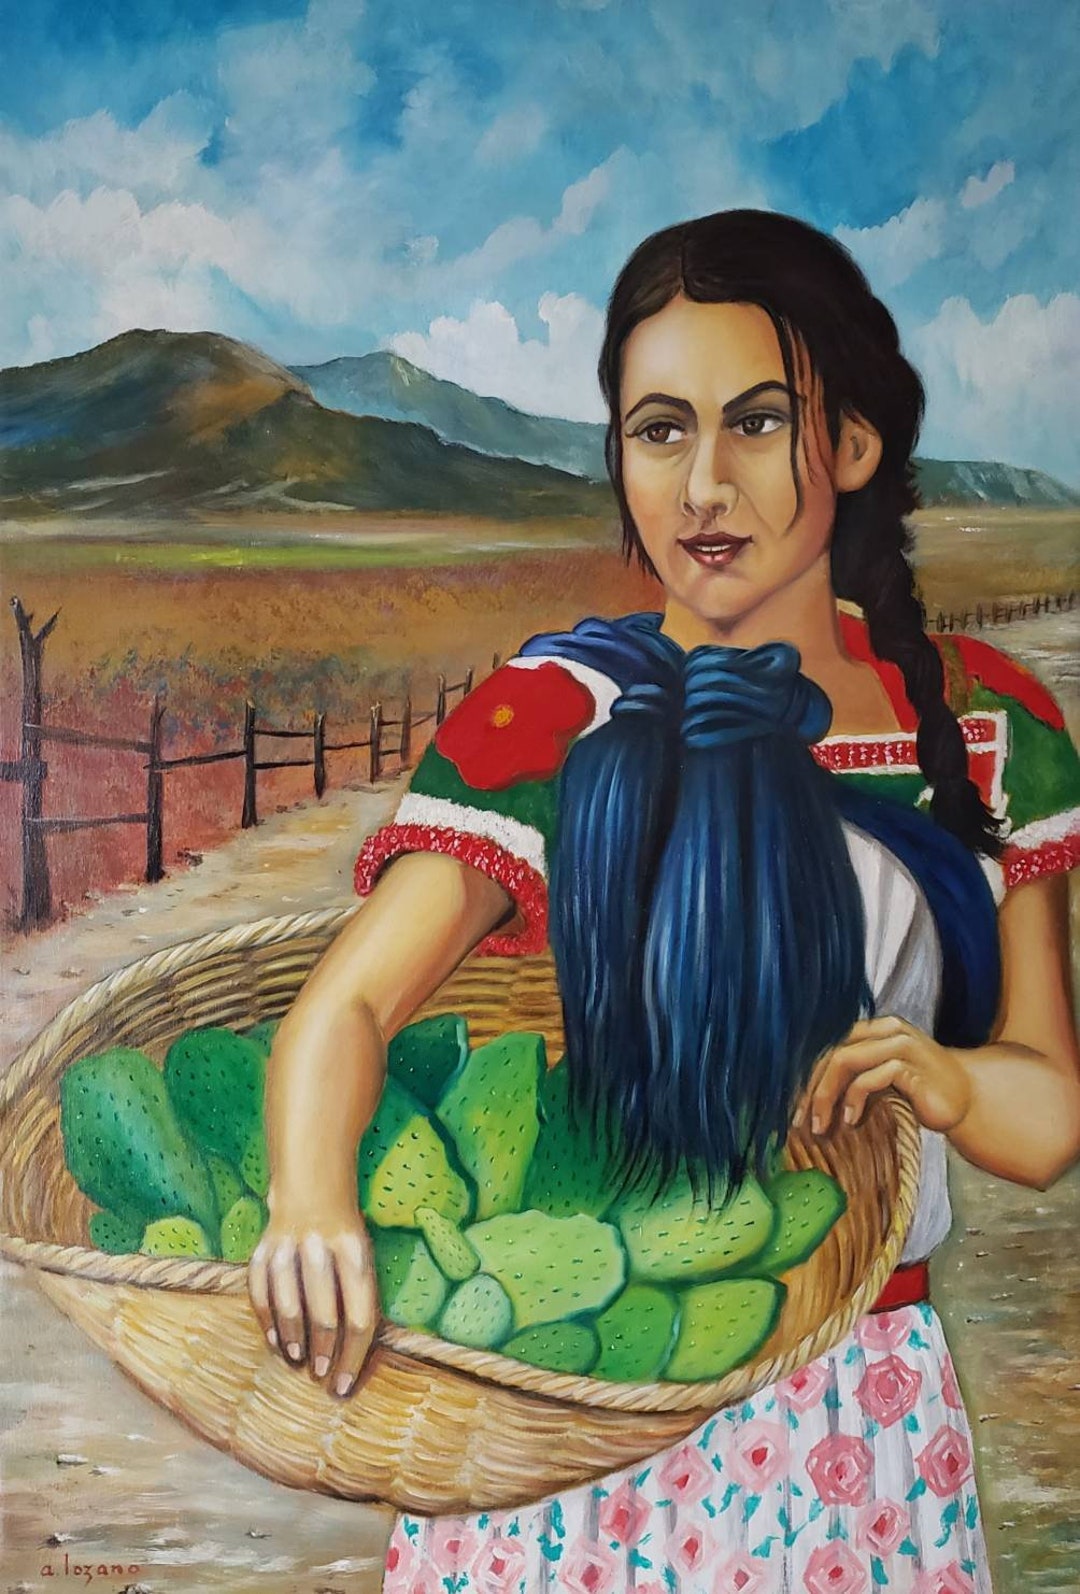 mexican american paintings